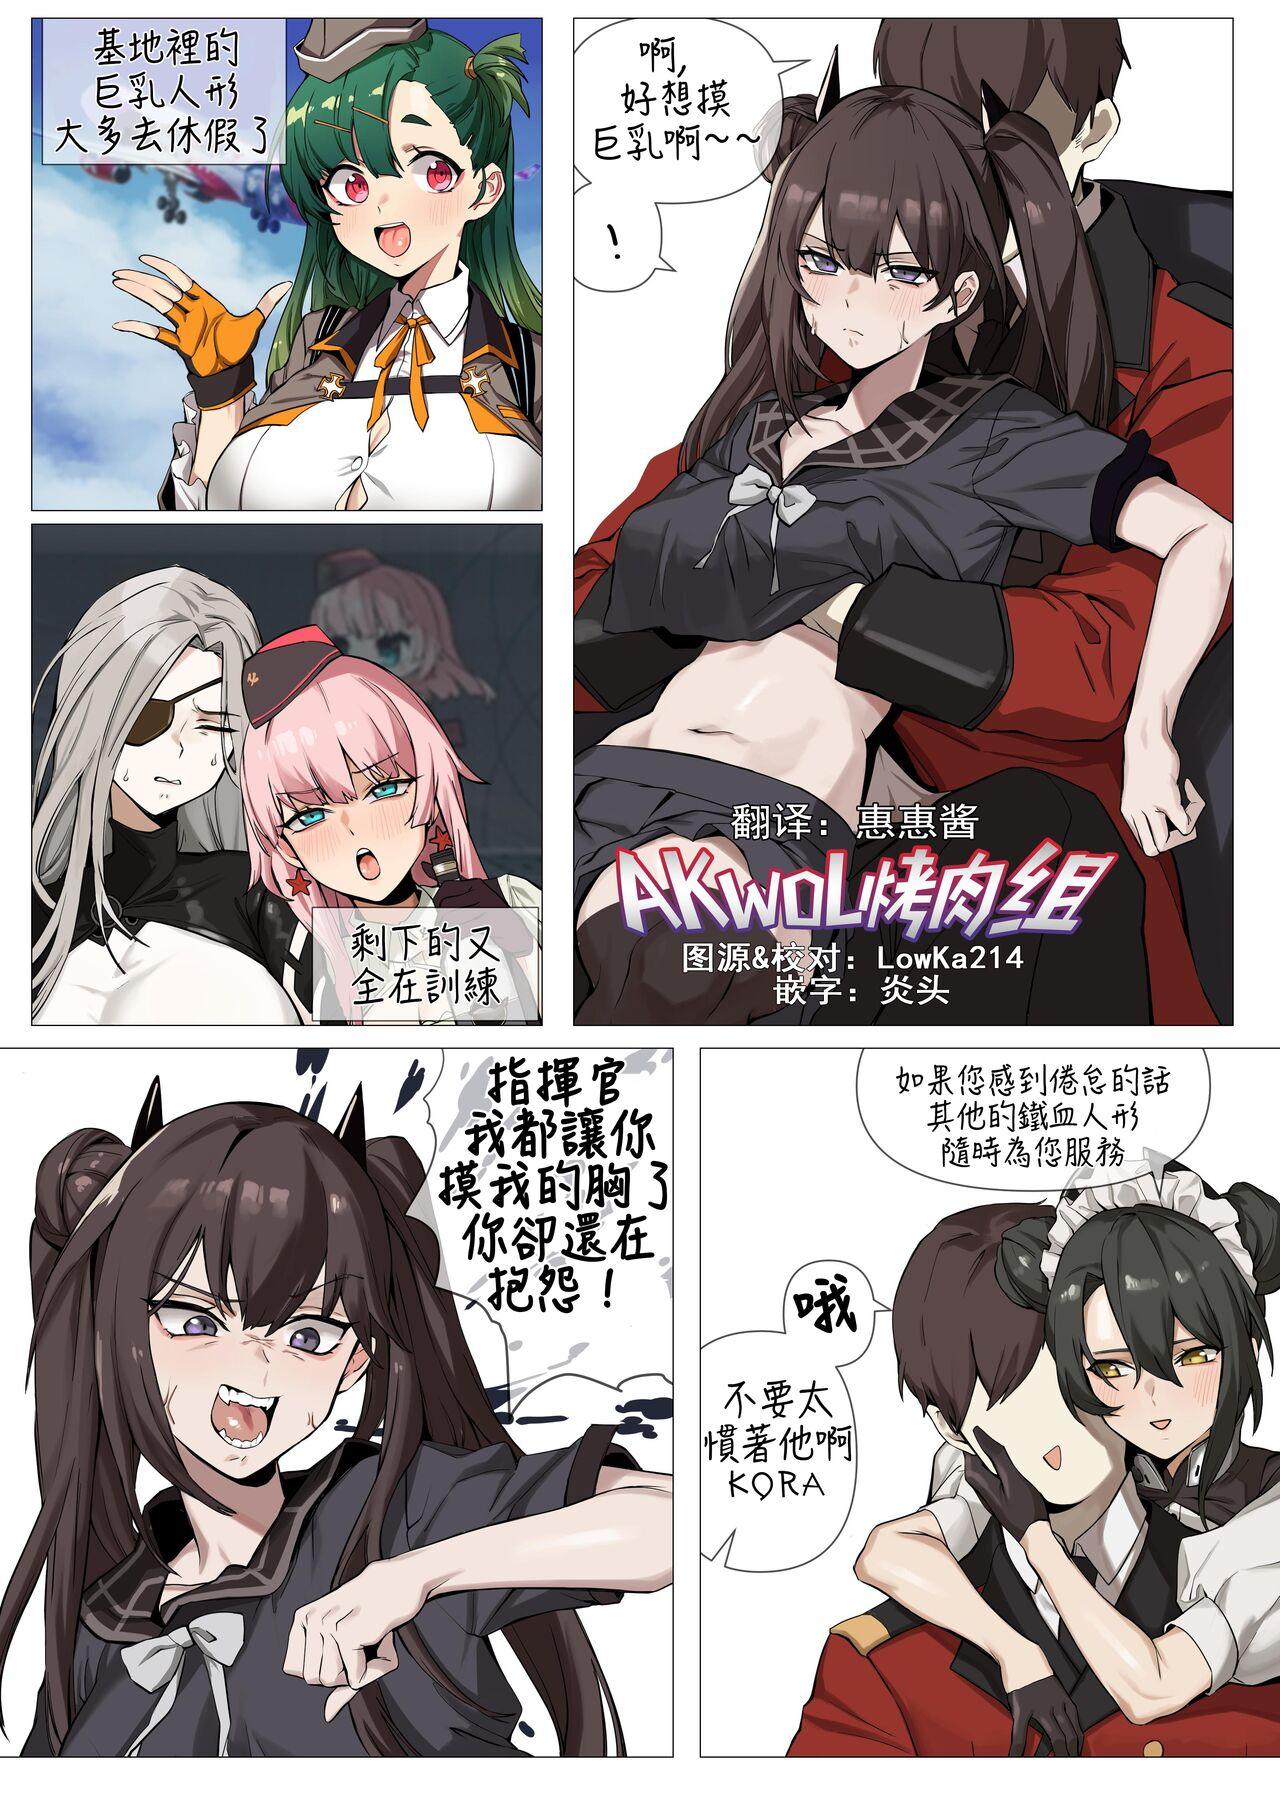 Real Amature Porn DP-12 - Girls frontline Sucking Dick - Page 1